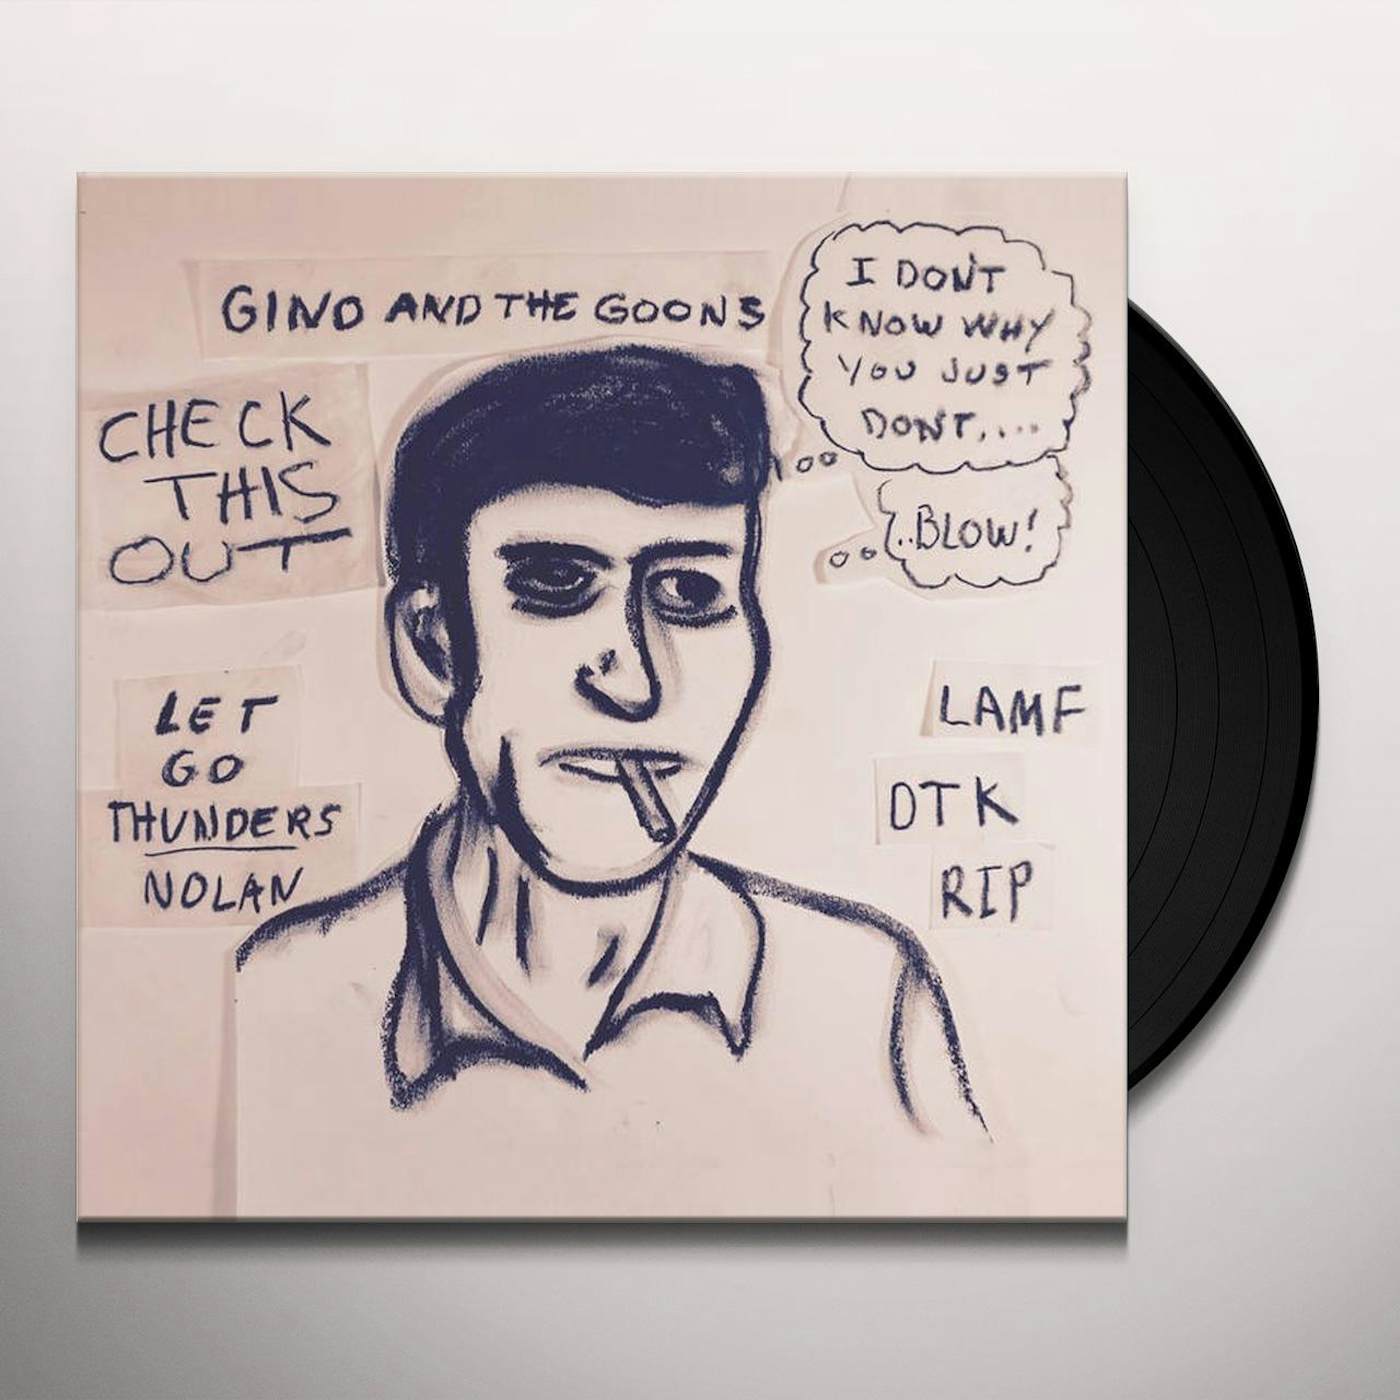 Gino and the Goons CHECK THIS OUT 2015 Vinyl Record